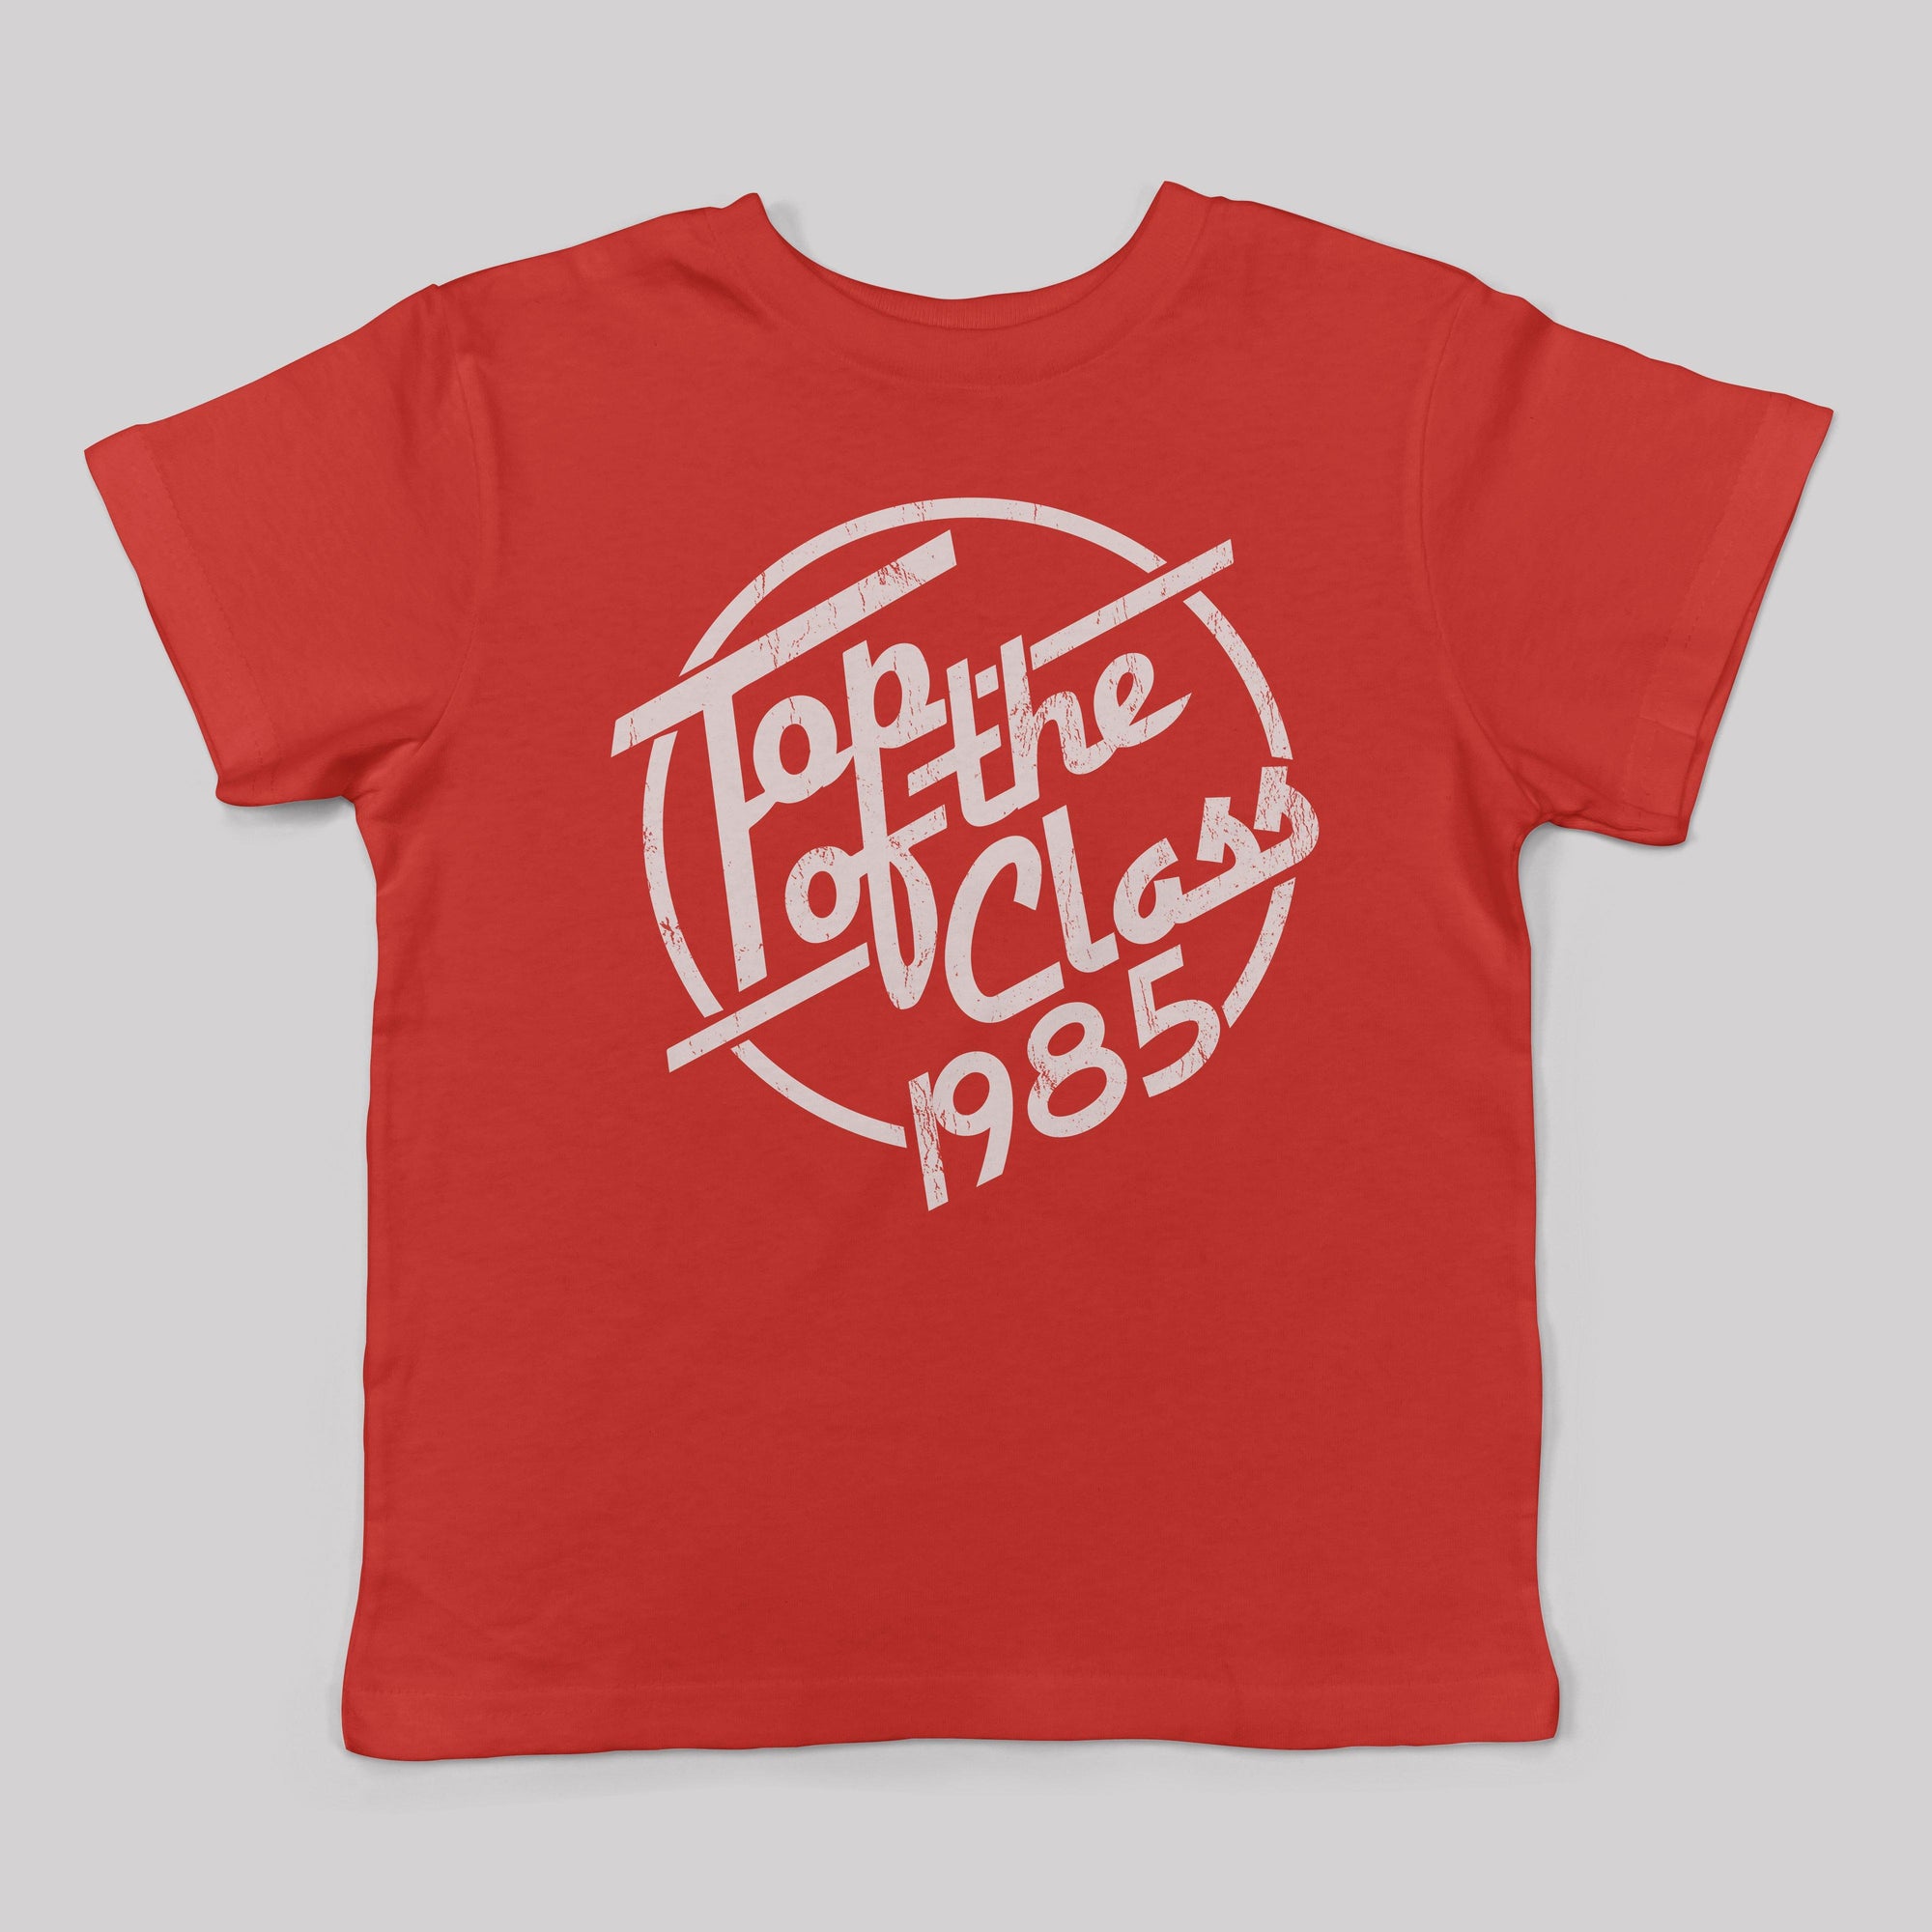 Top of the Class Kids Tee (4 Colors) - Baby Teith